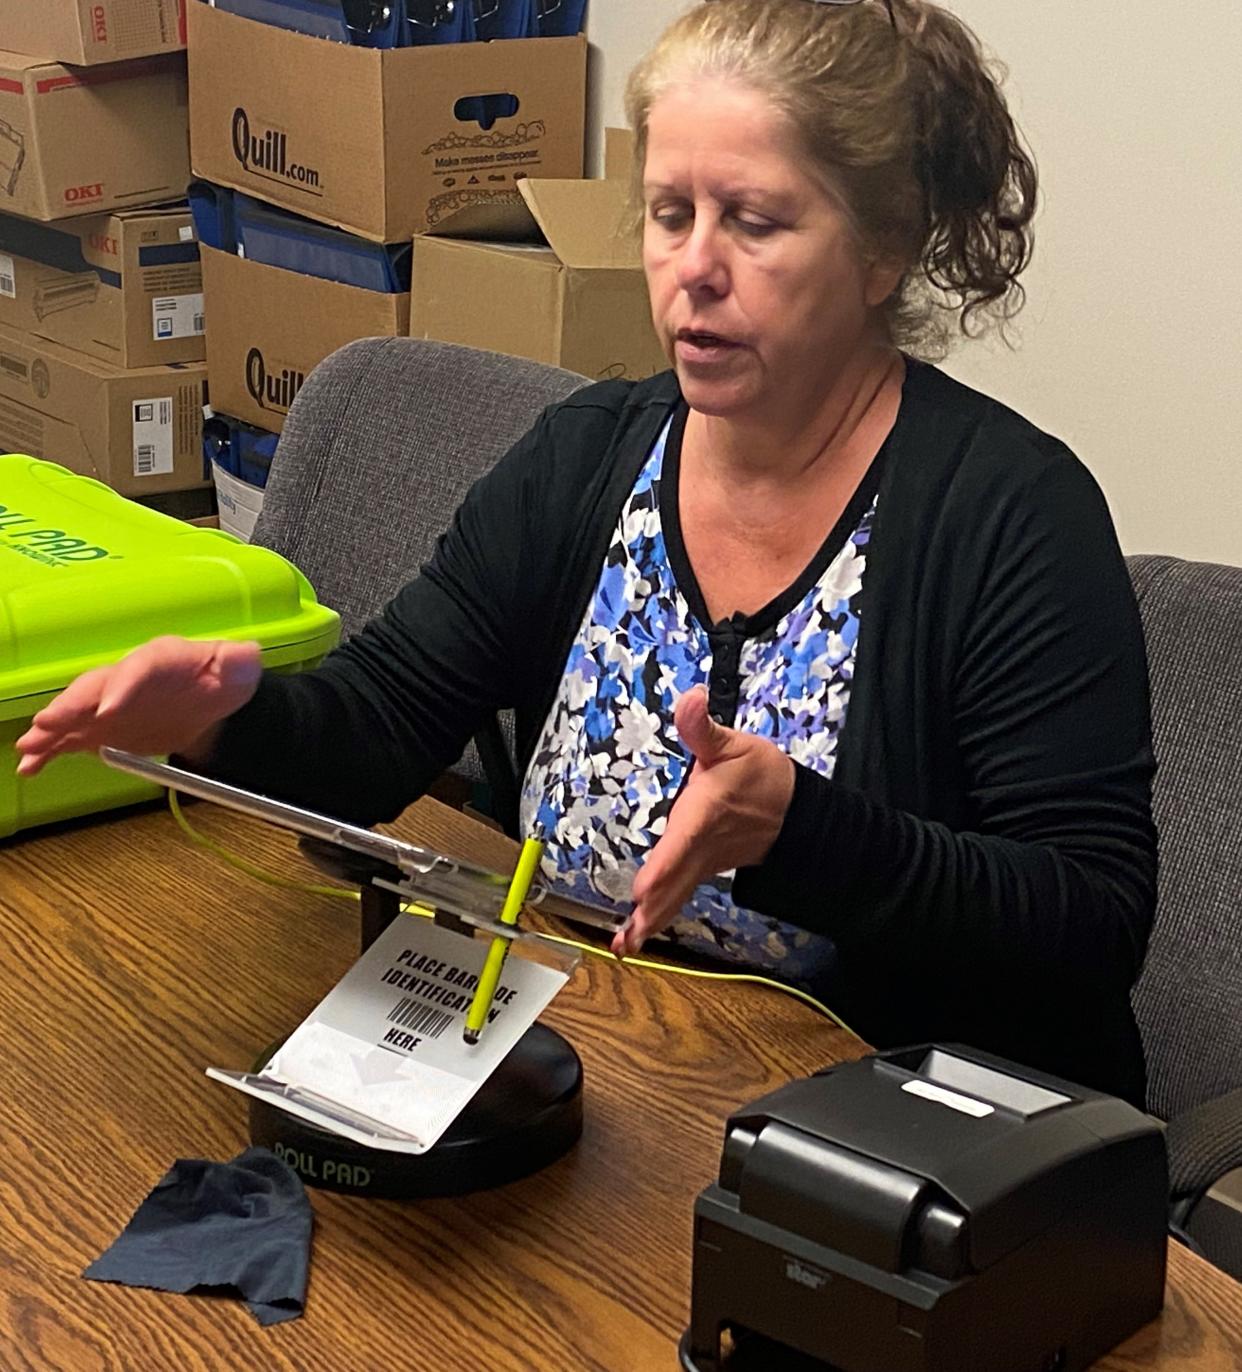 Guernsey County Board of Elections Director Lori Bamfield works with one of the touch pads that poll workers will utilize to check in voters and have them sign for a ballot in a one-step process that will be utilized during the May 2022 Primary Election.